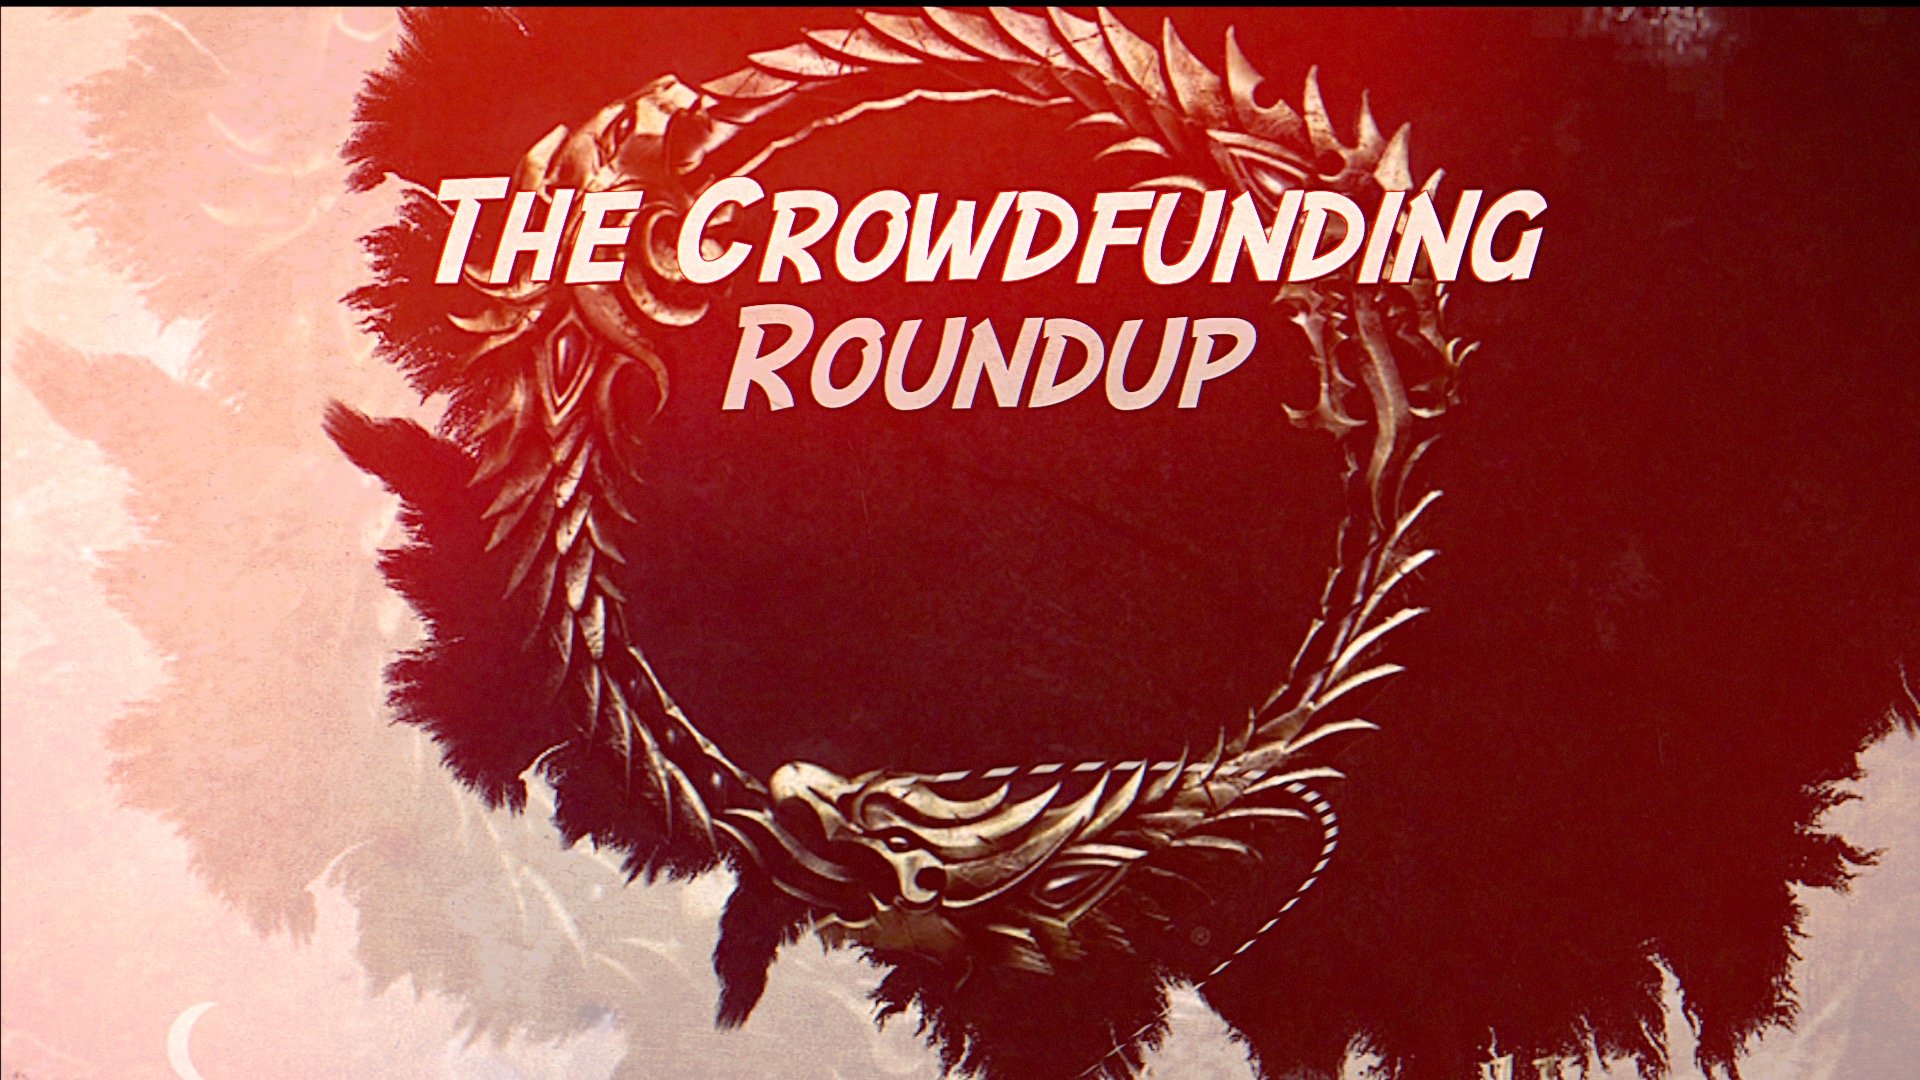 The Crowdfunding Roundup for Tuesday, March 28th